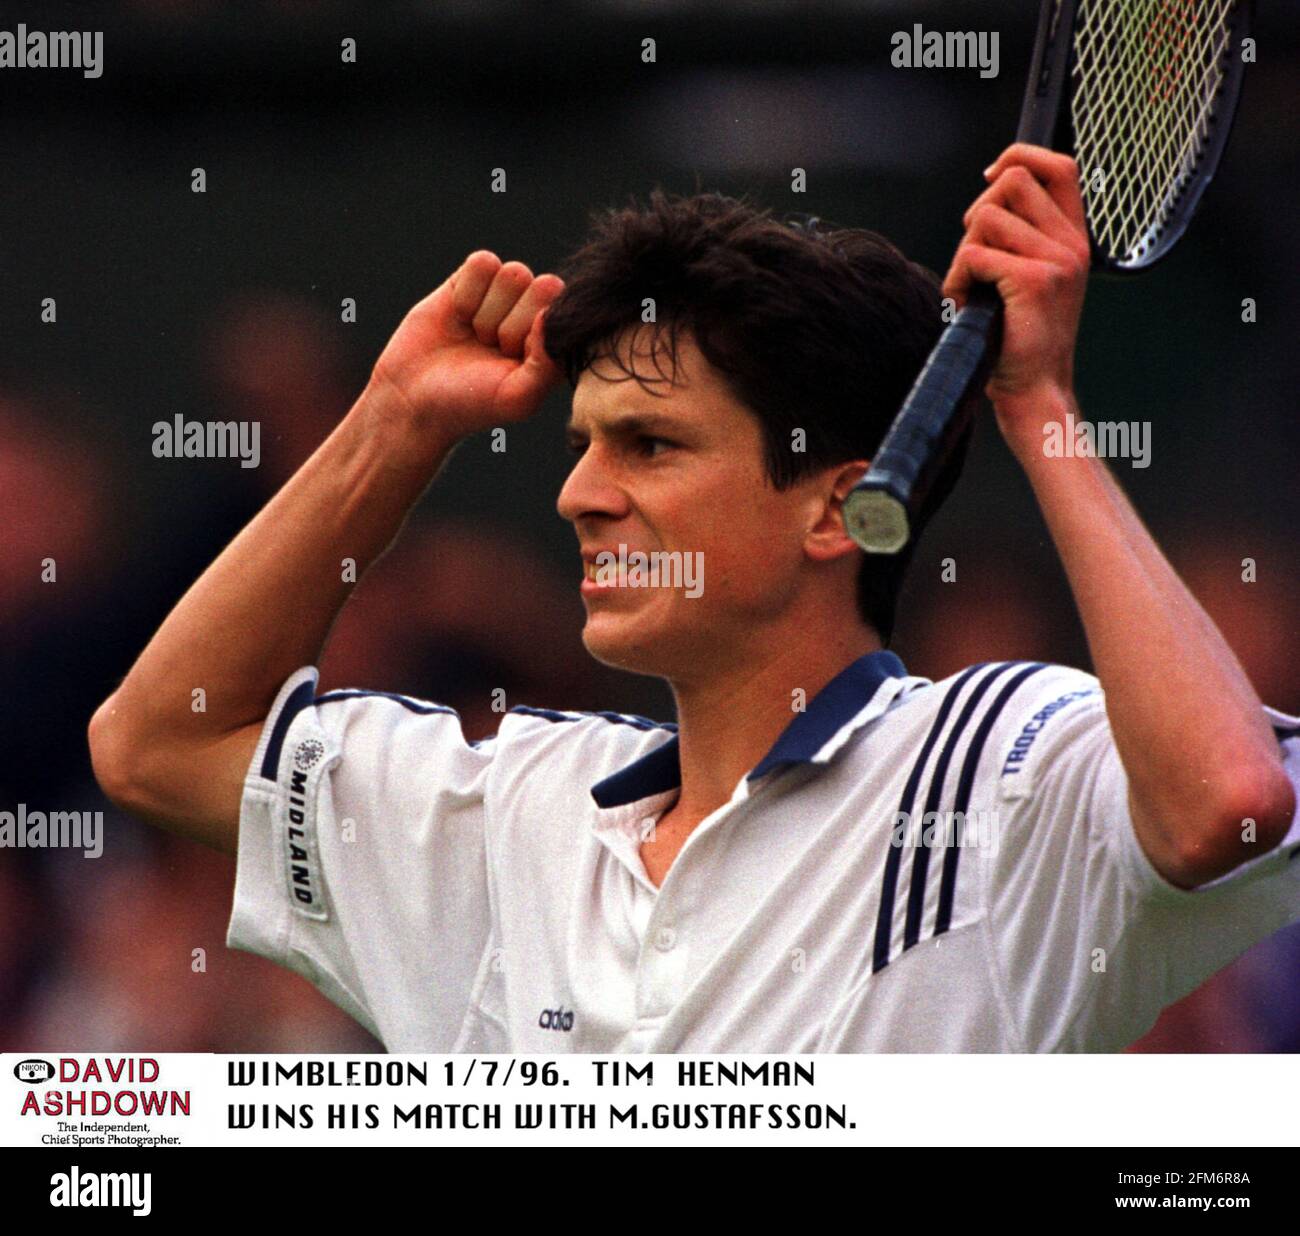 TIM HENMAN WINS HIS MATCH AGAINST MAGNUS 6-4 7-6 AND IS NOW THROUGH TO THE QUARTER FINALS AT WIMBLEDON Stock Photo - Alamy